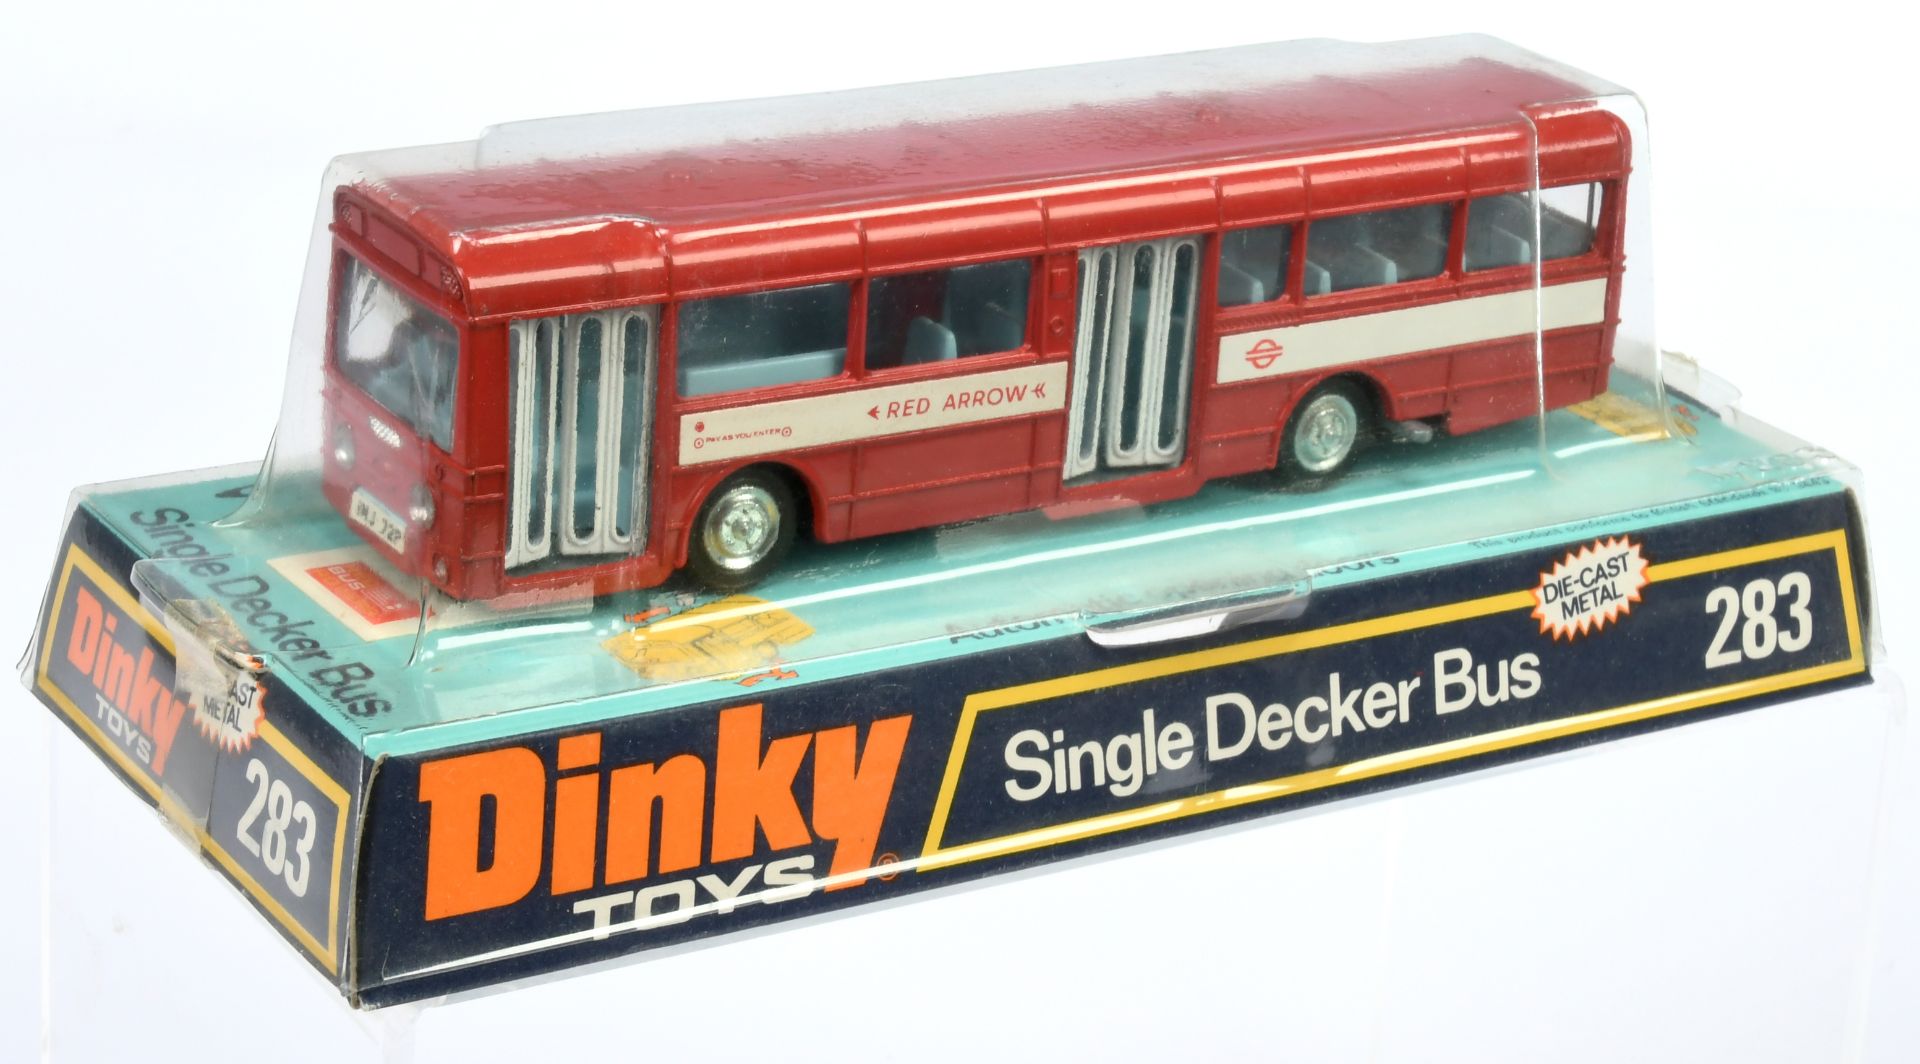 Dinky Toys 283 Single Decker Bus "Red Arrow" - Red body, pale blue interior, black base, white op...